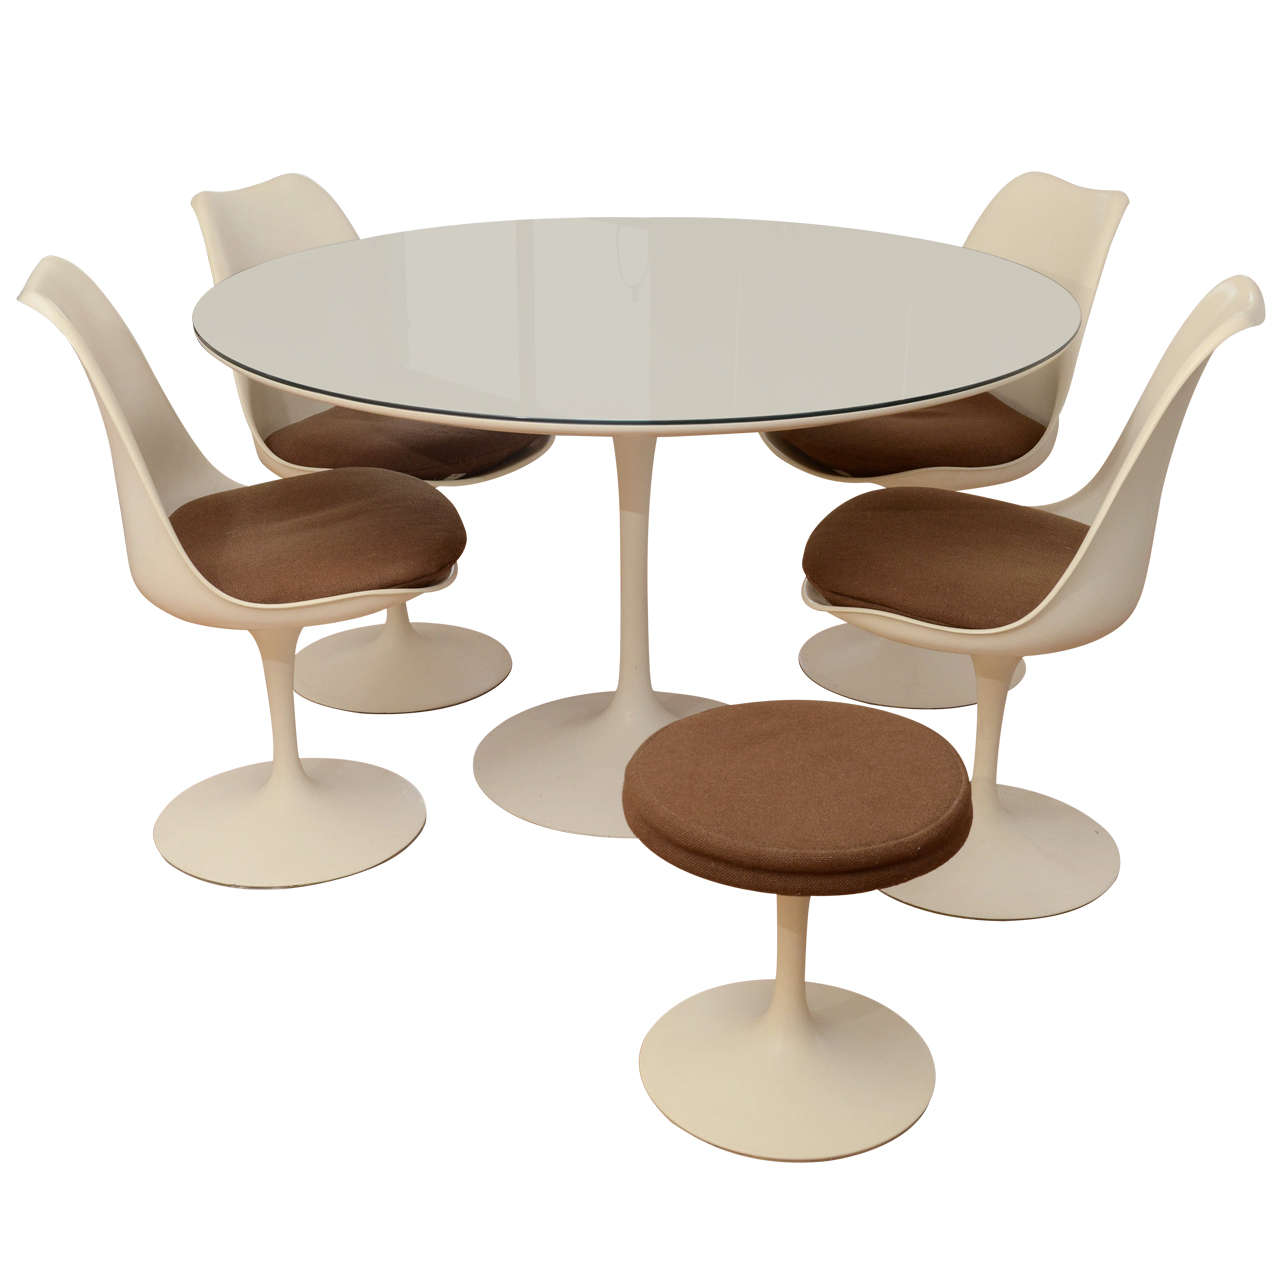 Classic & Original Saarinen Dining Table with 4 Chairs & Stool  For Sale